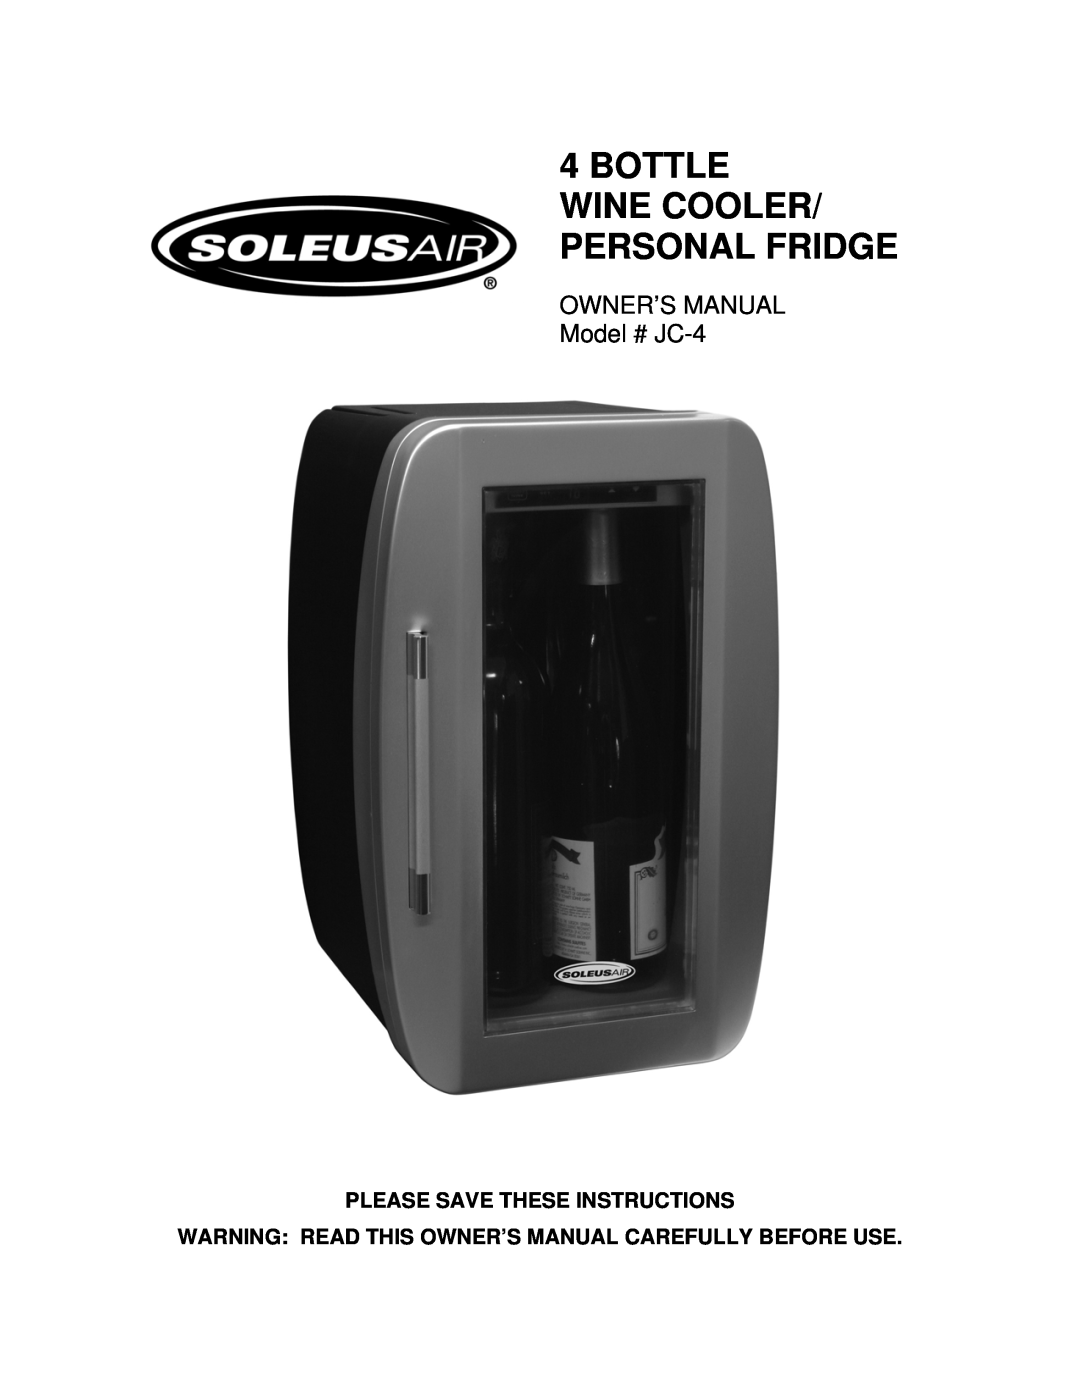 Soleus Air JC-4 owner manual Please Save These Instructions, Bottle Wine Cooler/ Personal Fridge 